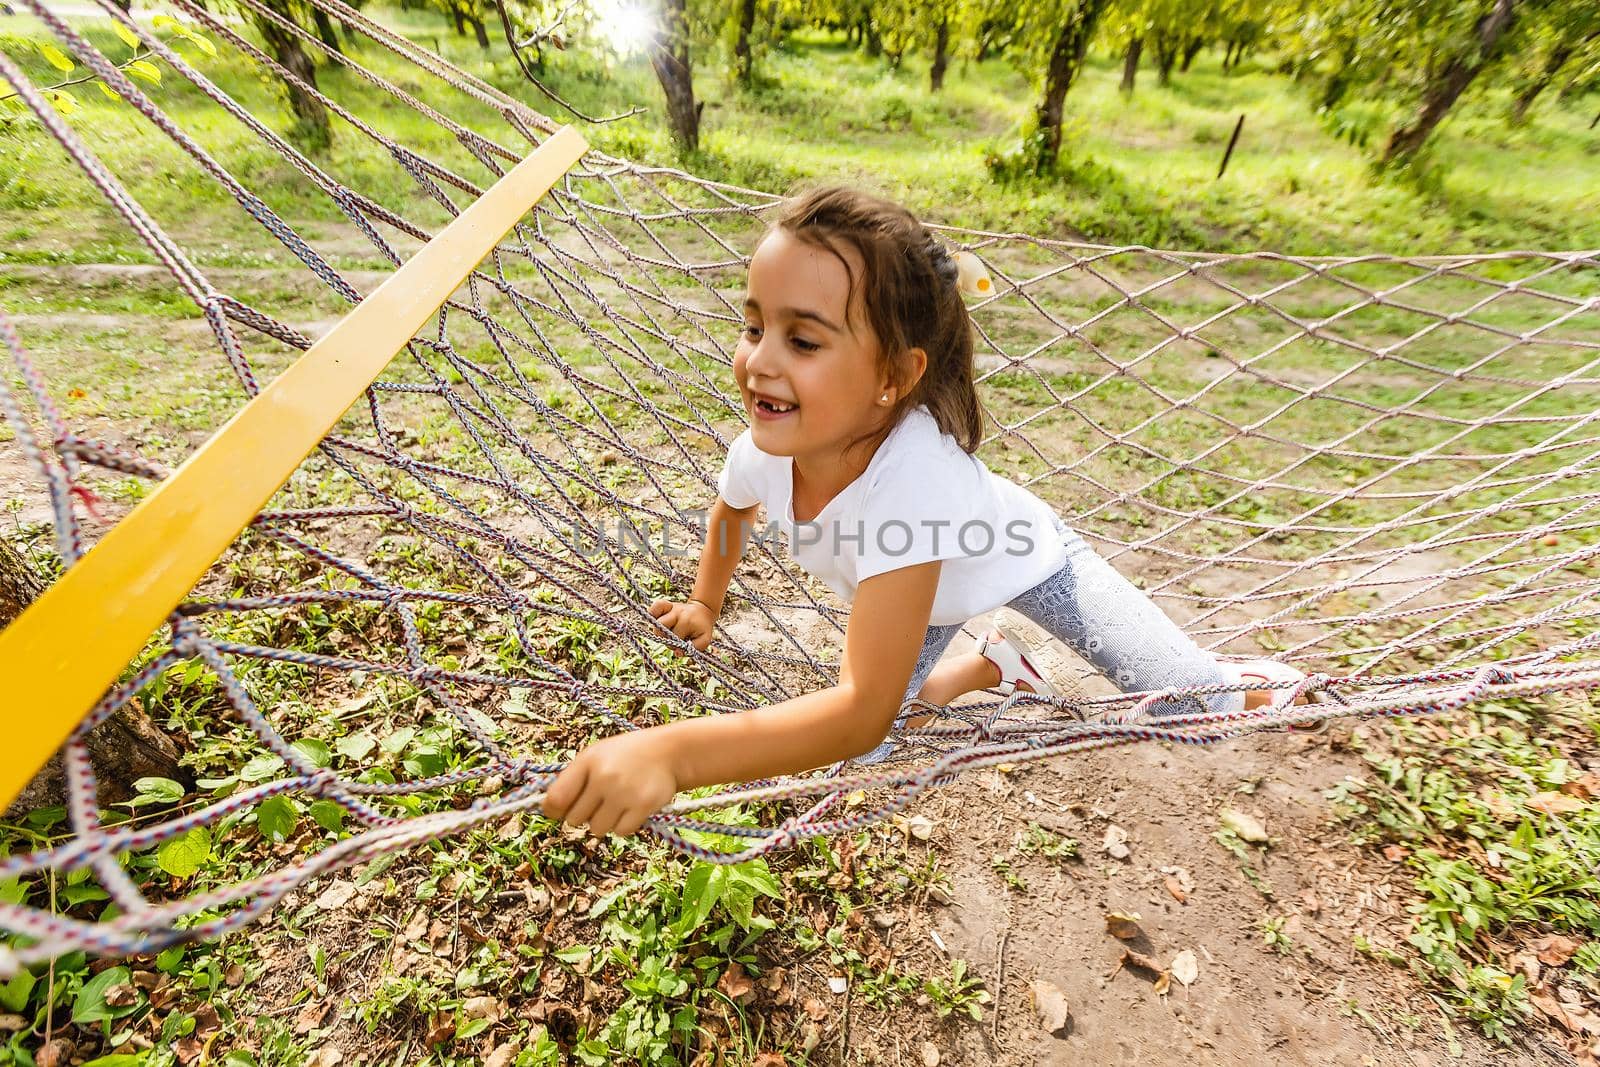 Little girl relaxing in hammock outdoors. Summer camp, vacation concept